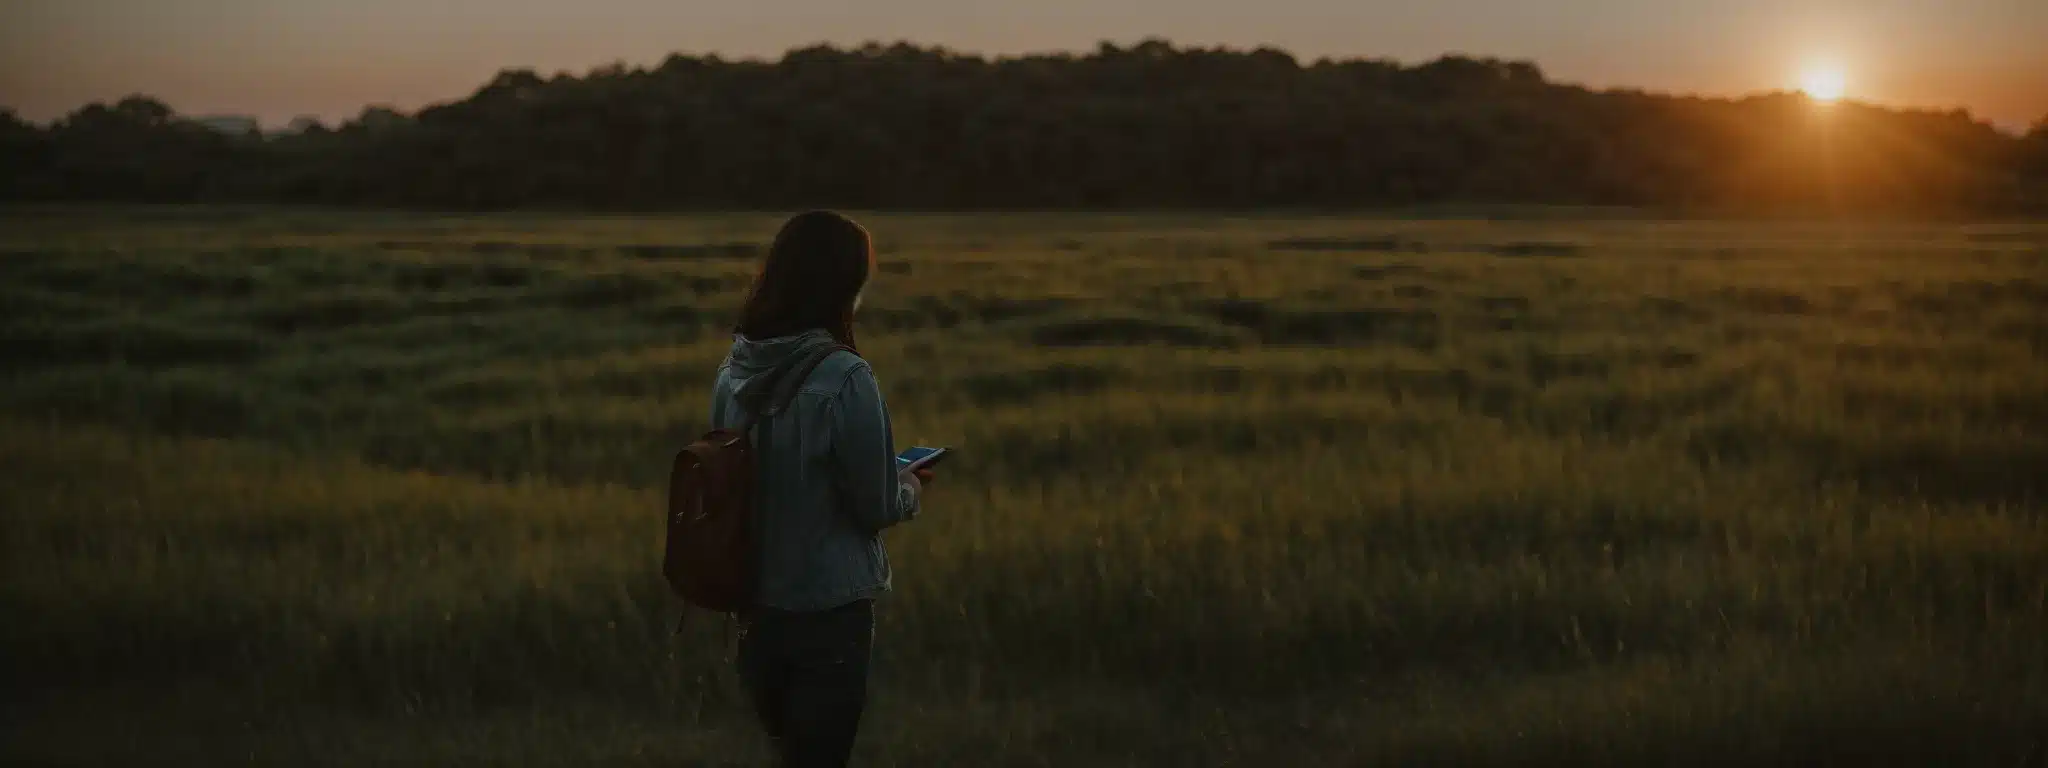 A Person Speaks Into A Smartphone While Strolling Through An Open Field At Sunset.